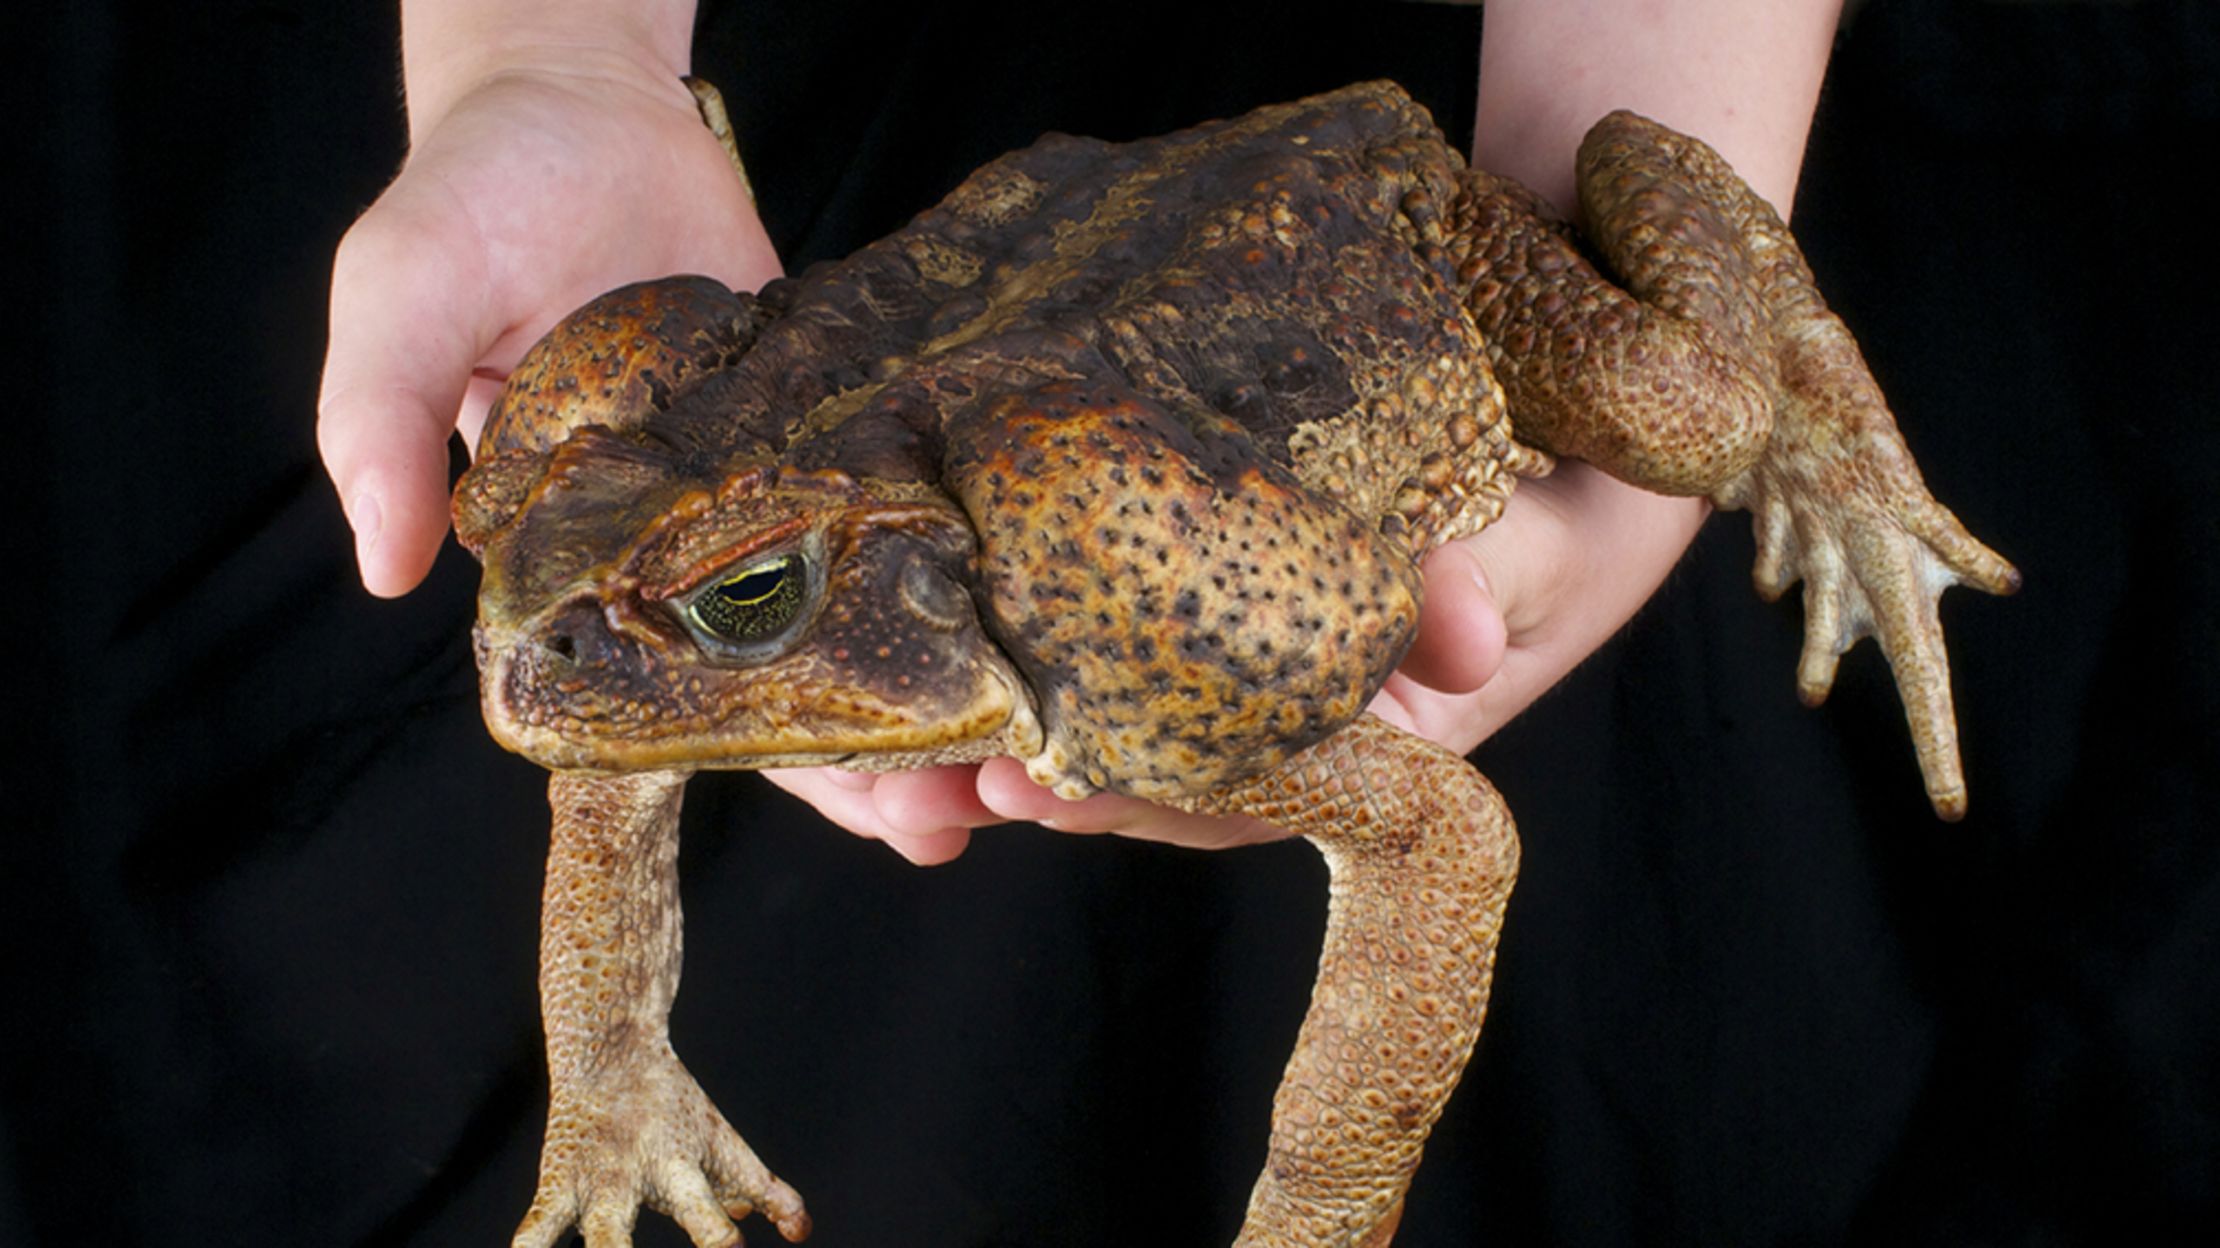 10 Bumpy Facts About Cane Toads Mental Floss